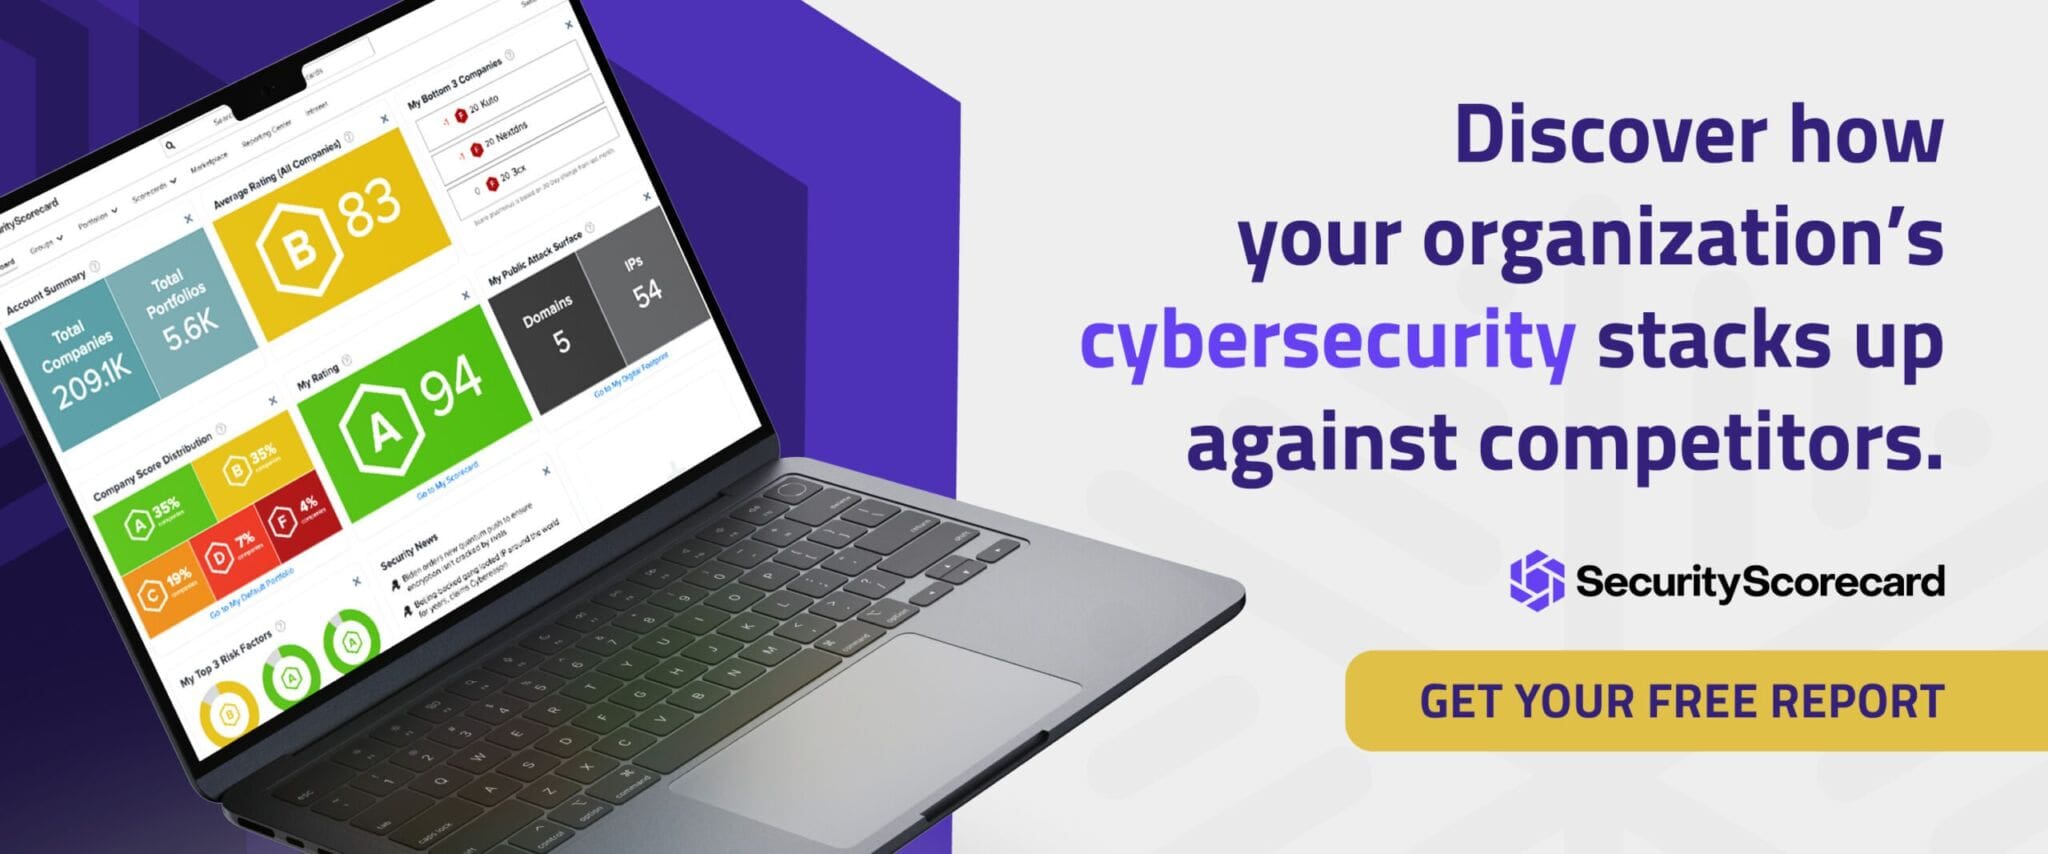 Discover how your organization's cybersecurity stacks up against competitors.